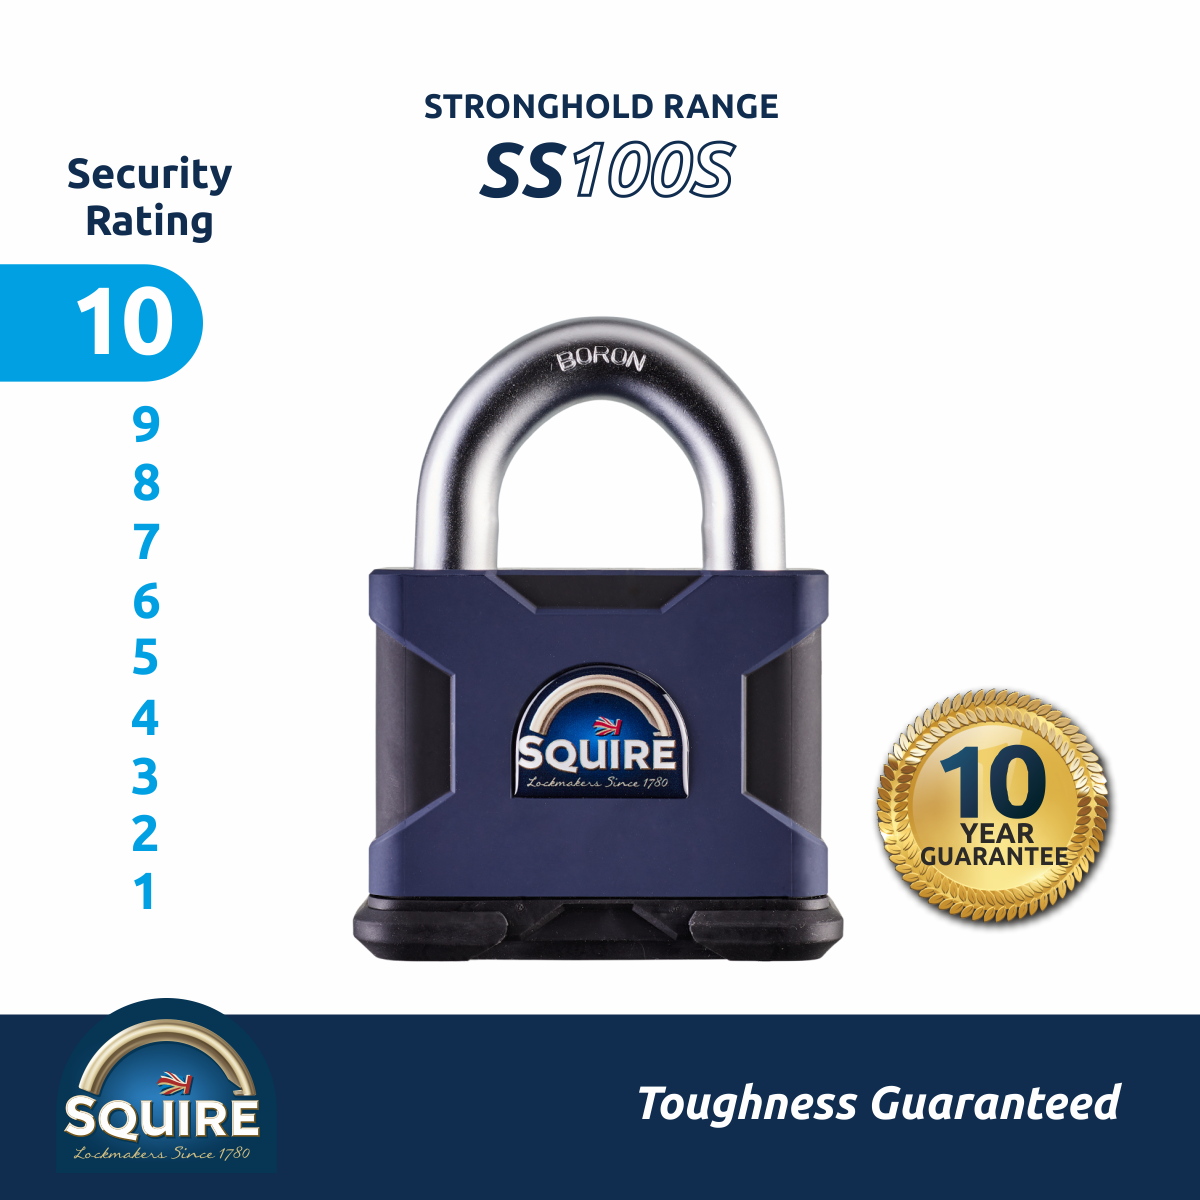 Introducing the World's Strongest Padlock